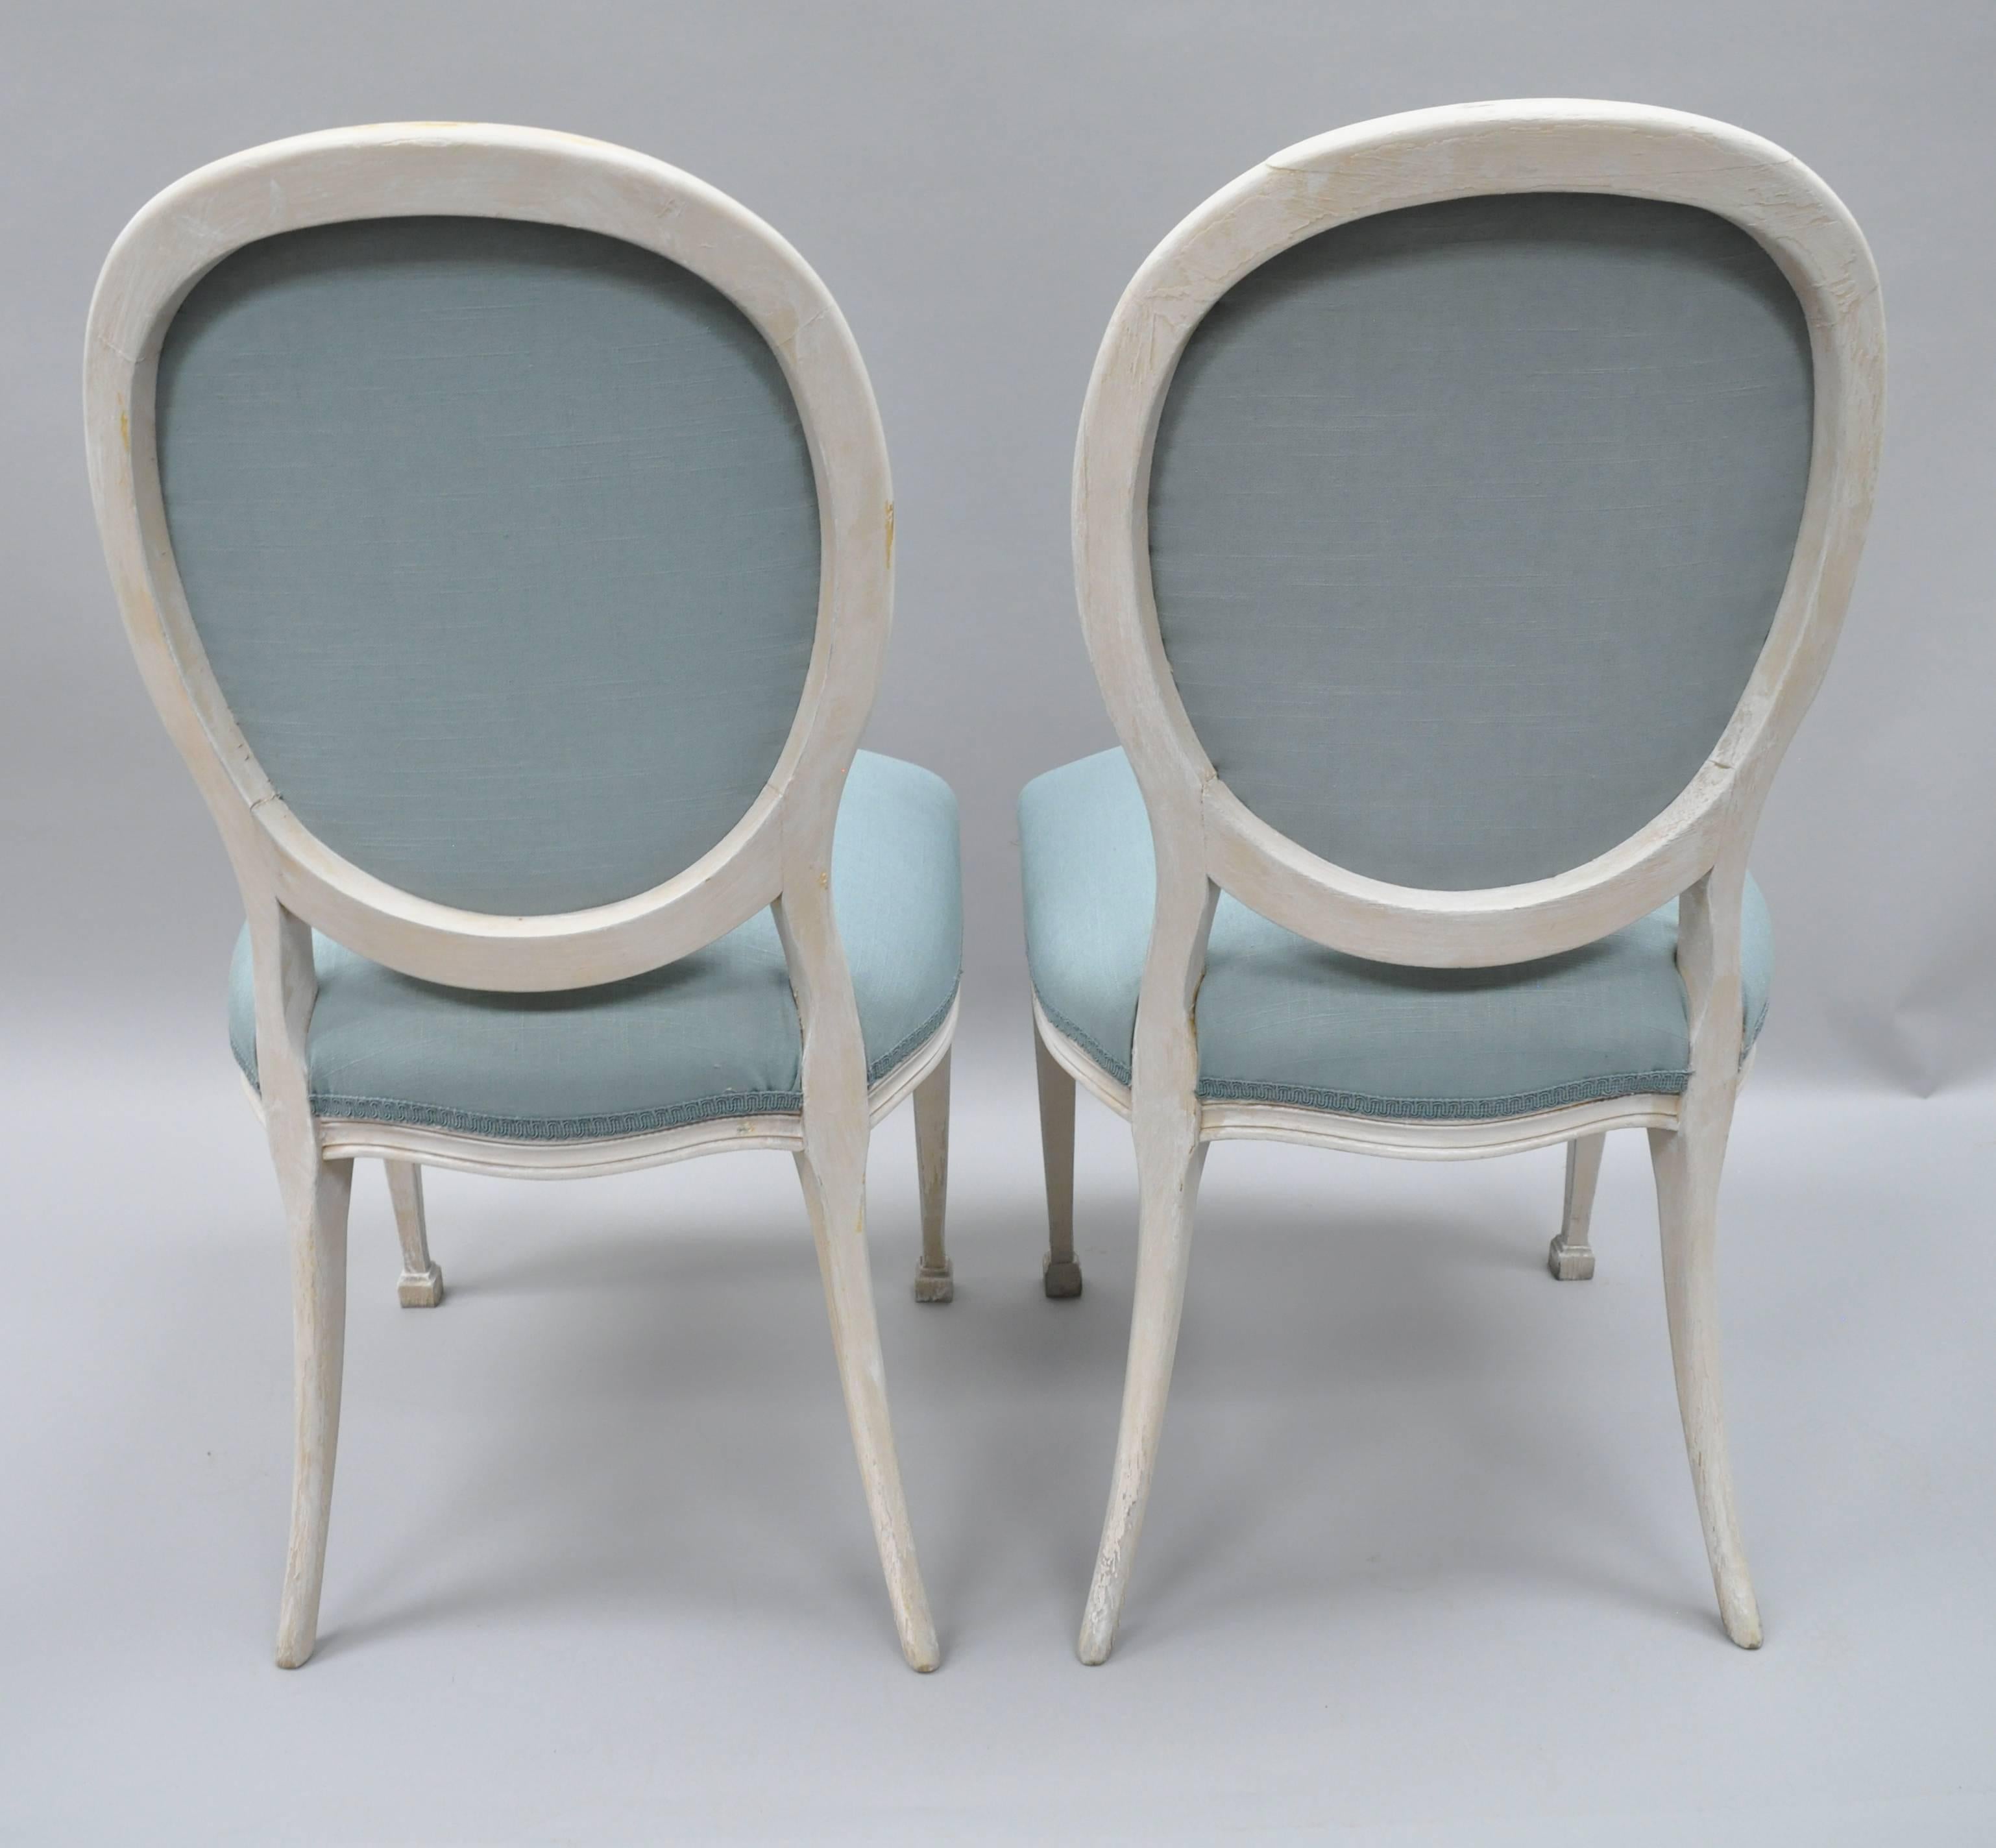 20th Century French Regency Neoclassical Style Dining Chairs, Set of Six